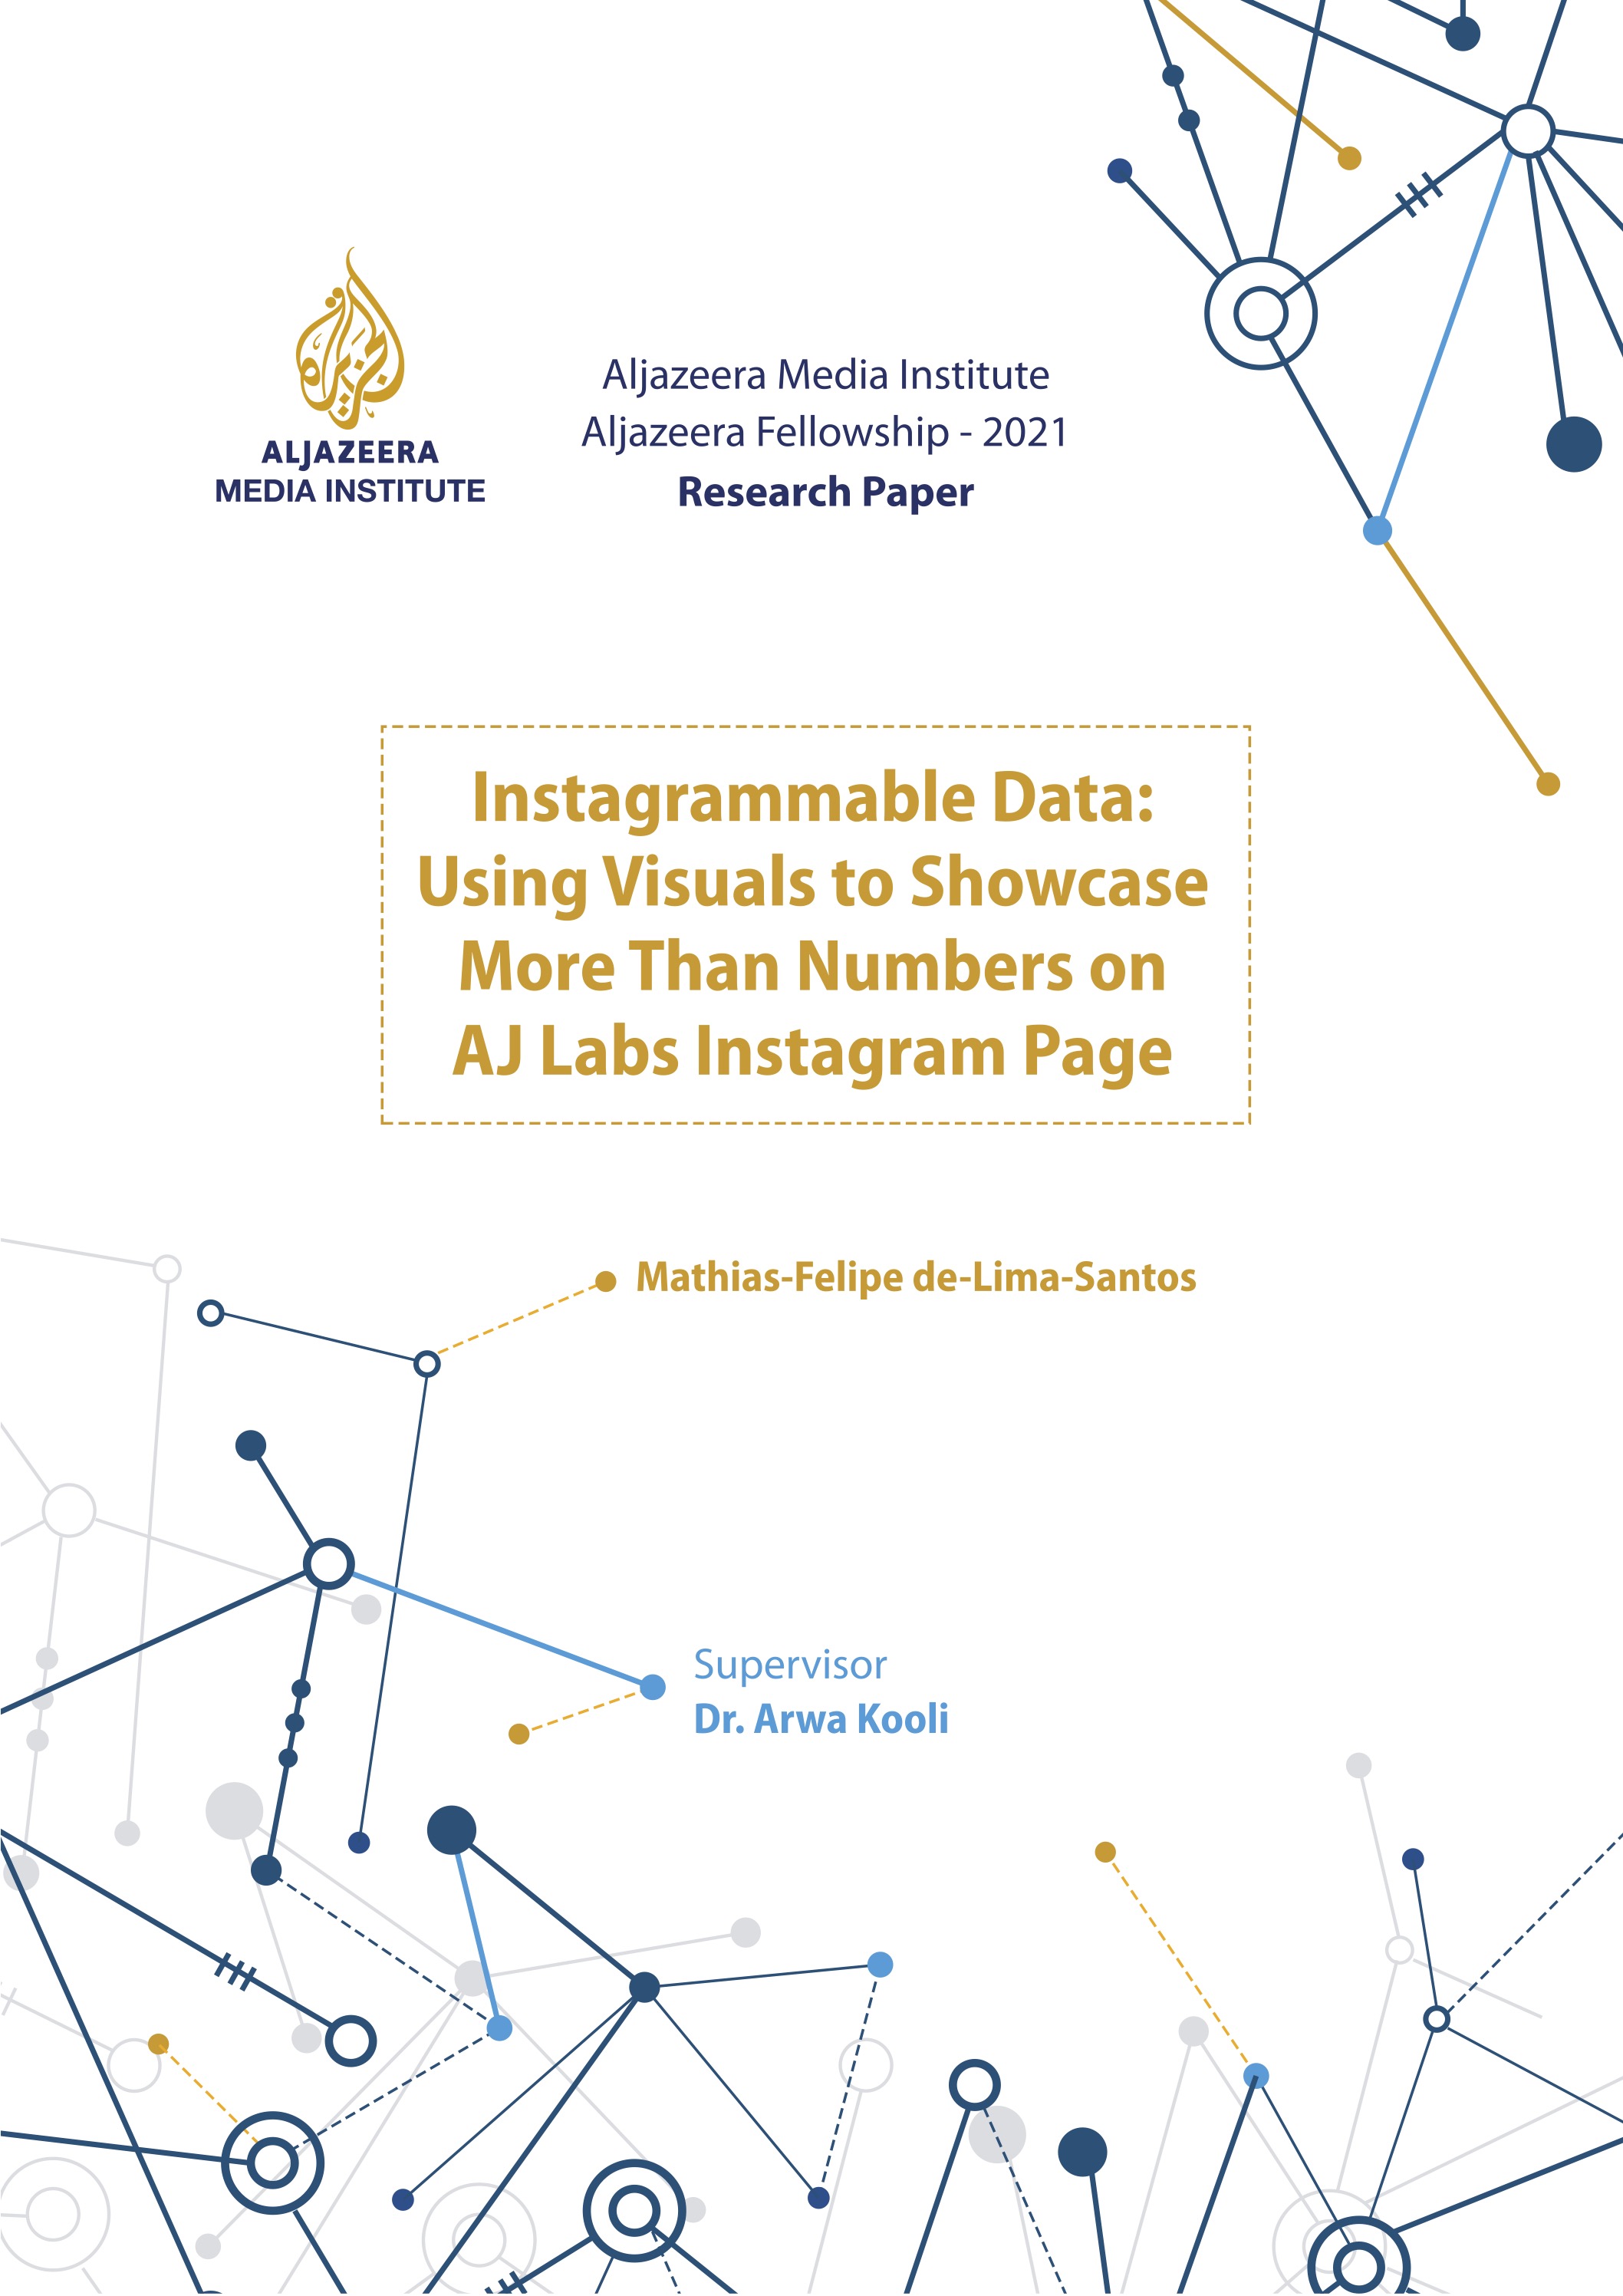 Instagrammable Data: Using Visuals to Showcase More Than Numbers on AJ Labs Instagram